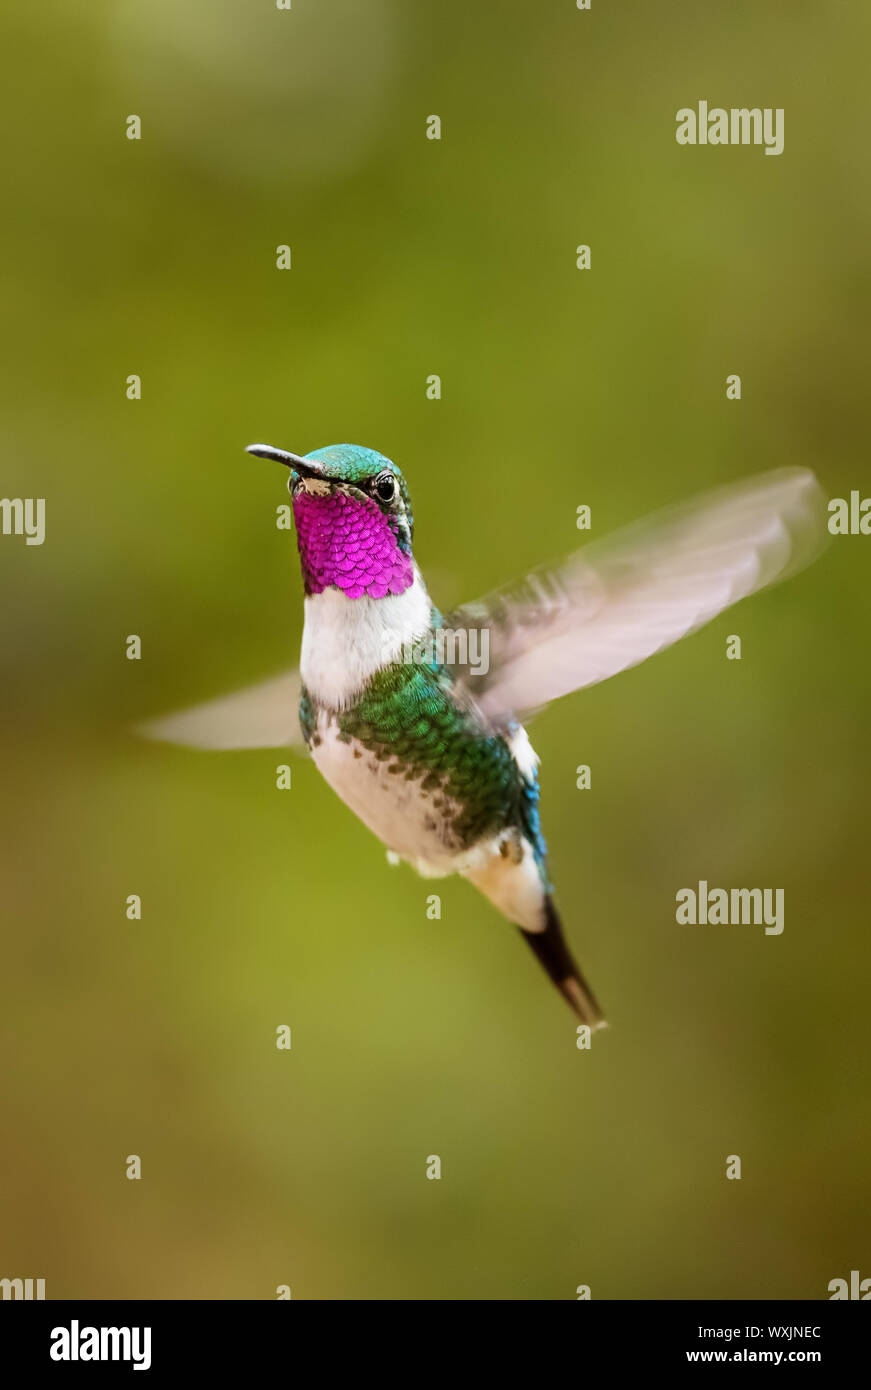 White-bellied Woodstar - Chaetocercus mulsant, beautiful colored tiny hummingbird from Andean slopes of South America, Guango Lodge, Ecuador. Stock Photo